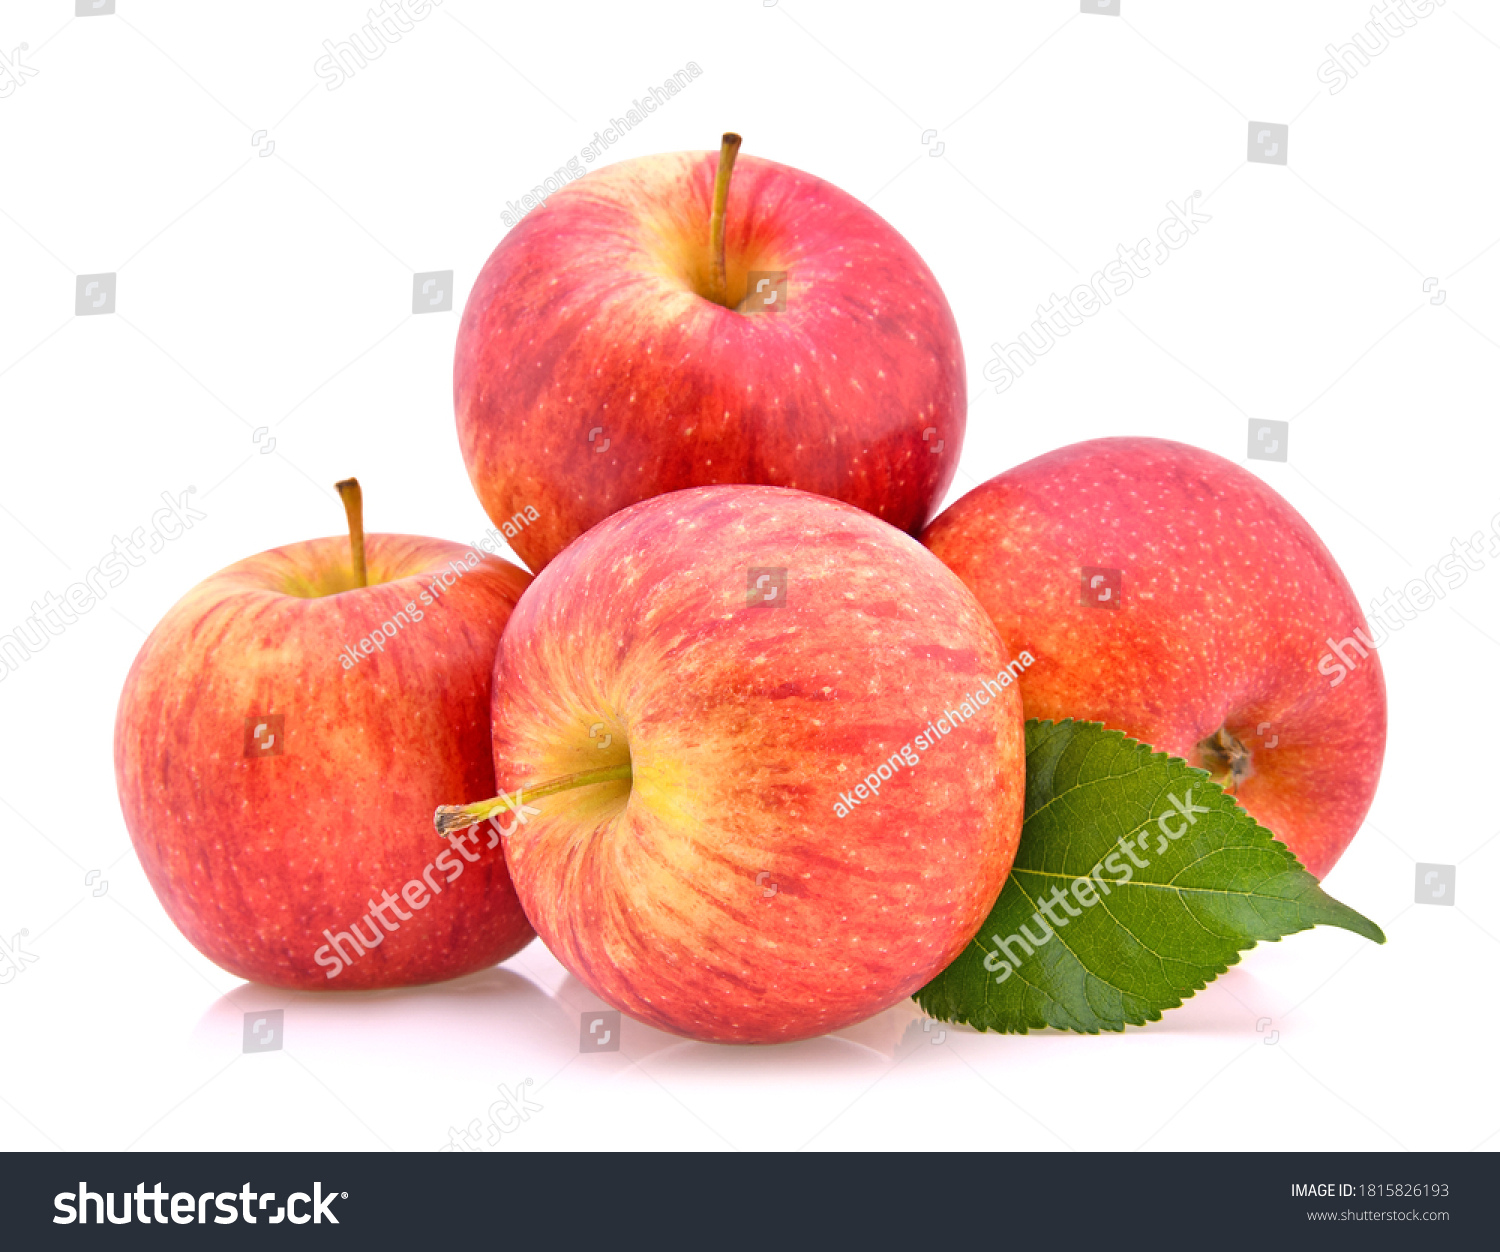 Gala apples isolate on white background #1815826193